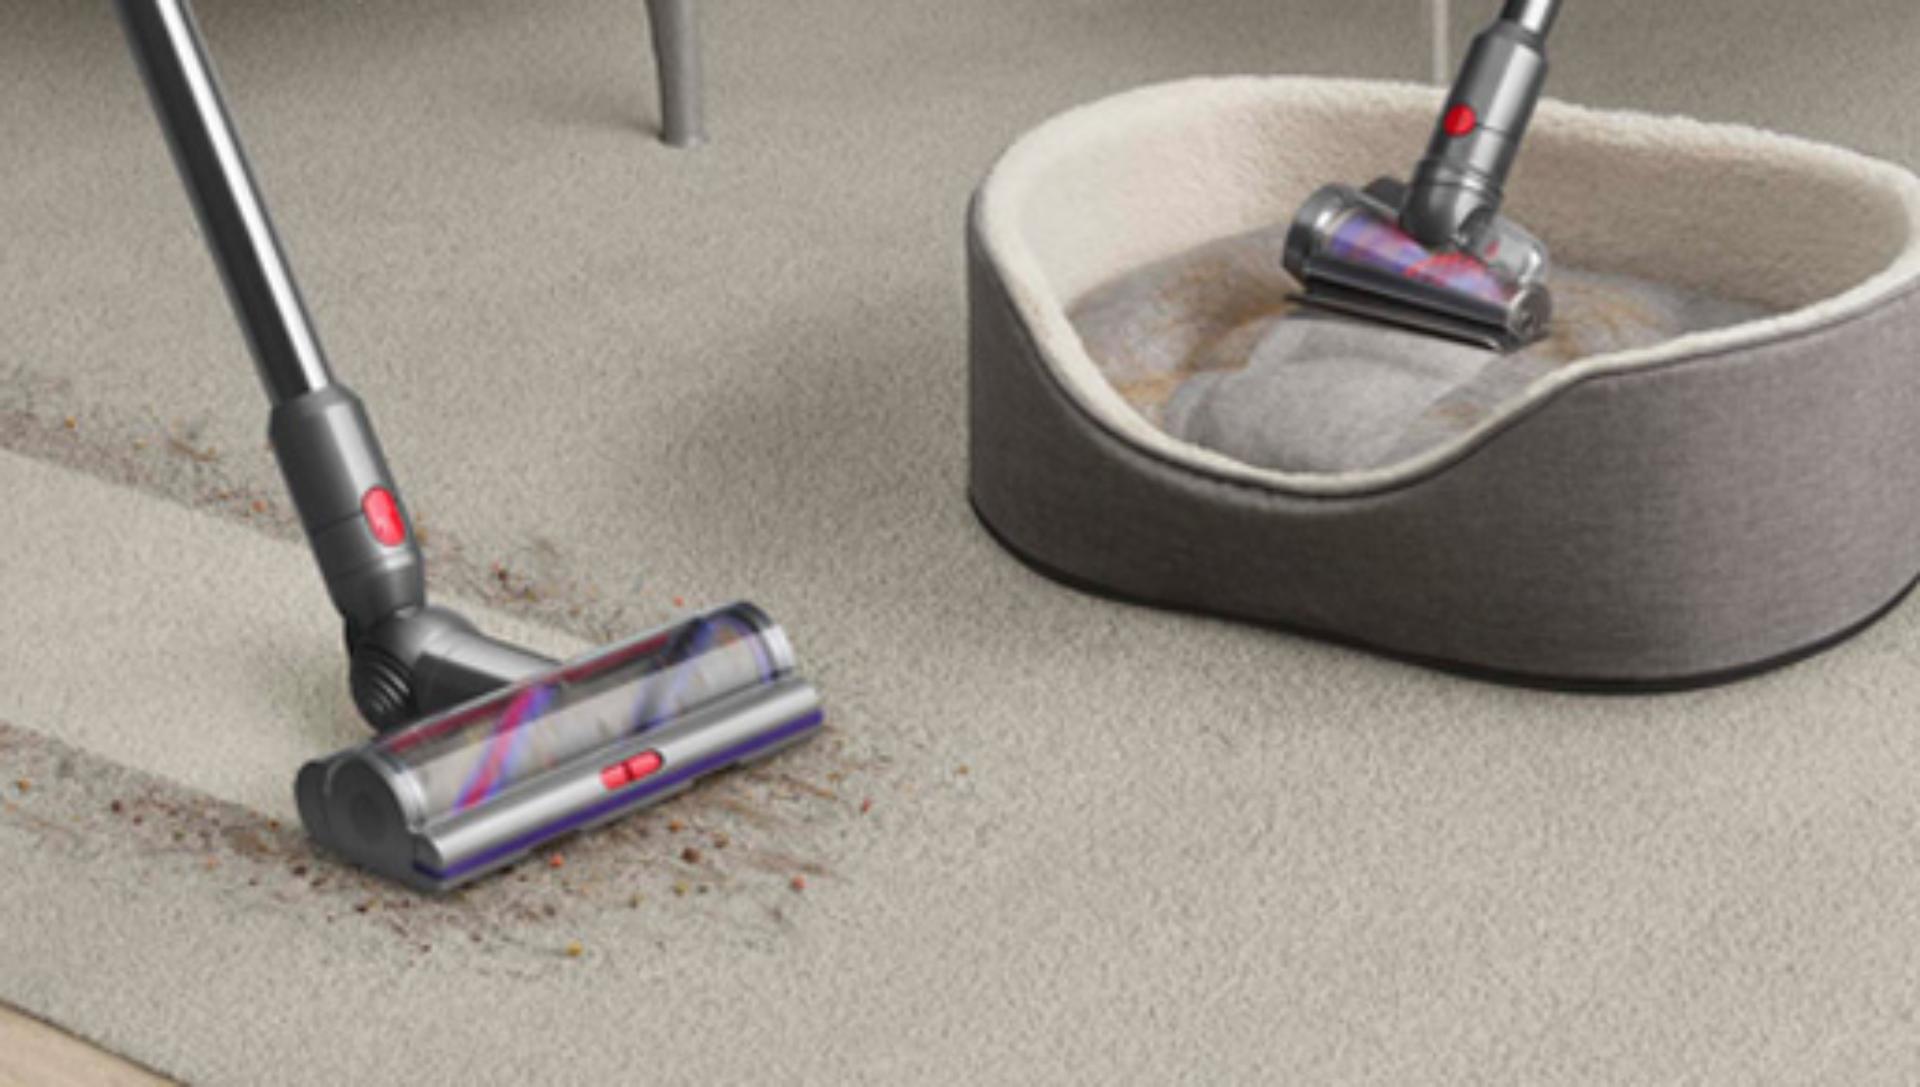 Dyson Hair screw tool cleans a pet bed, and a Motorbar cleaner head clears hair from a carpet